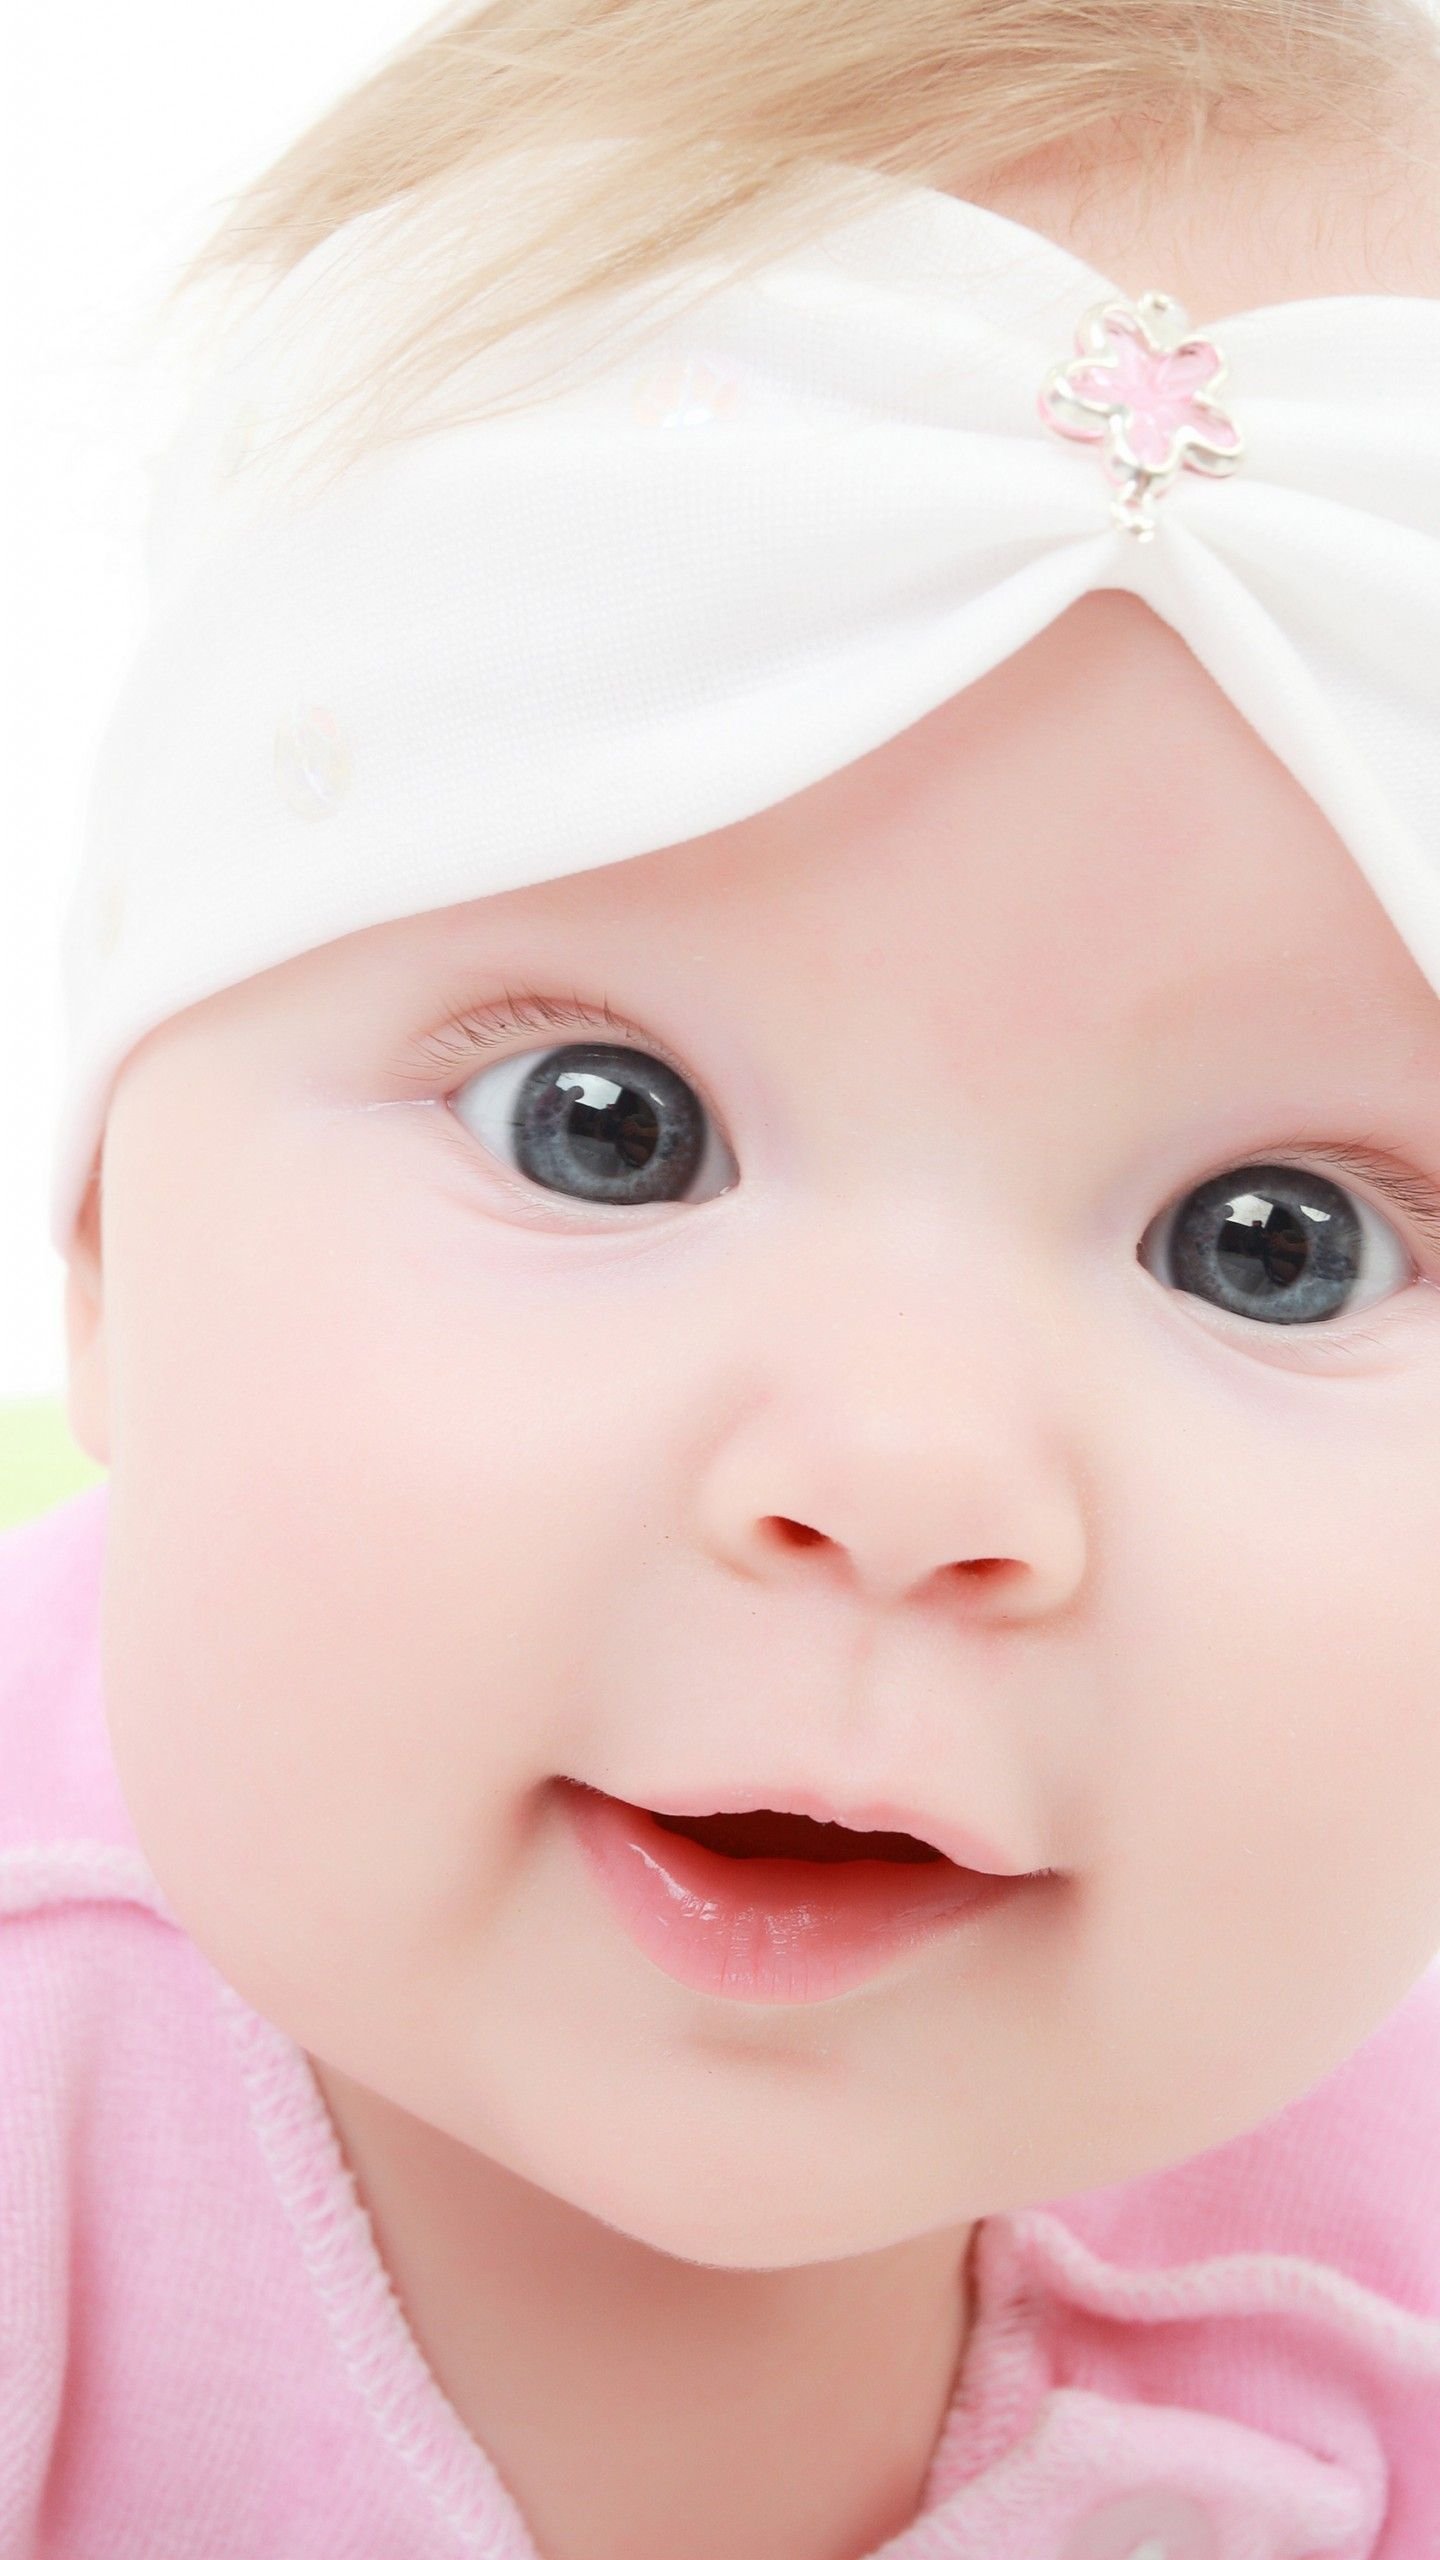 20,000+ Free Cute Baby Photos & Pictures in HD - Pixabay